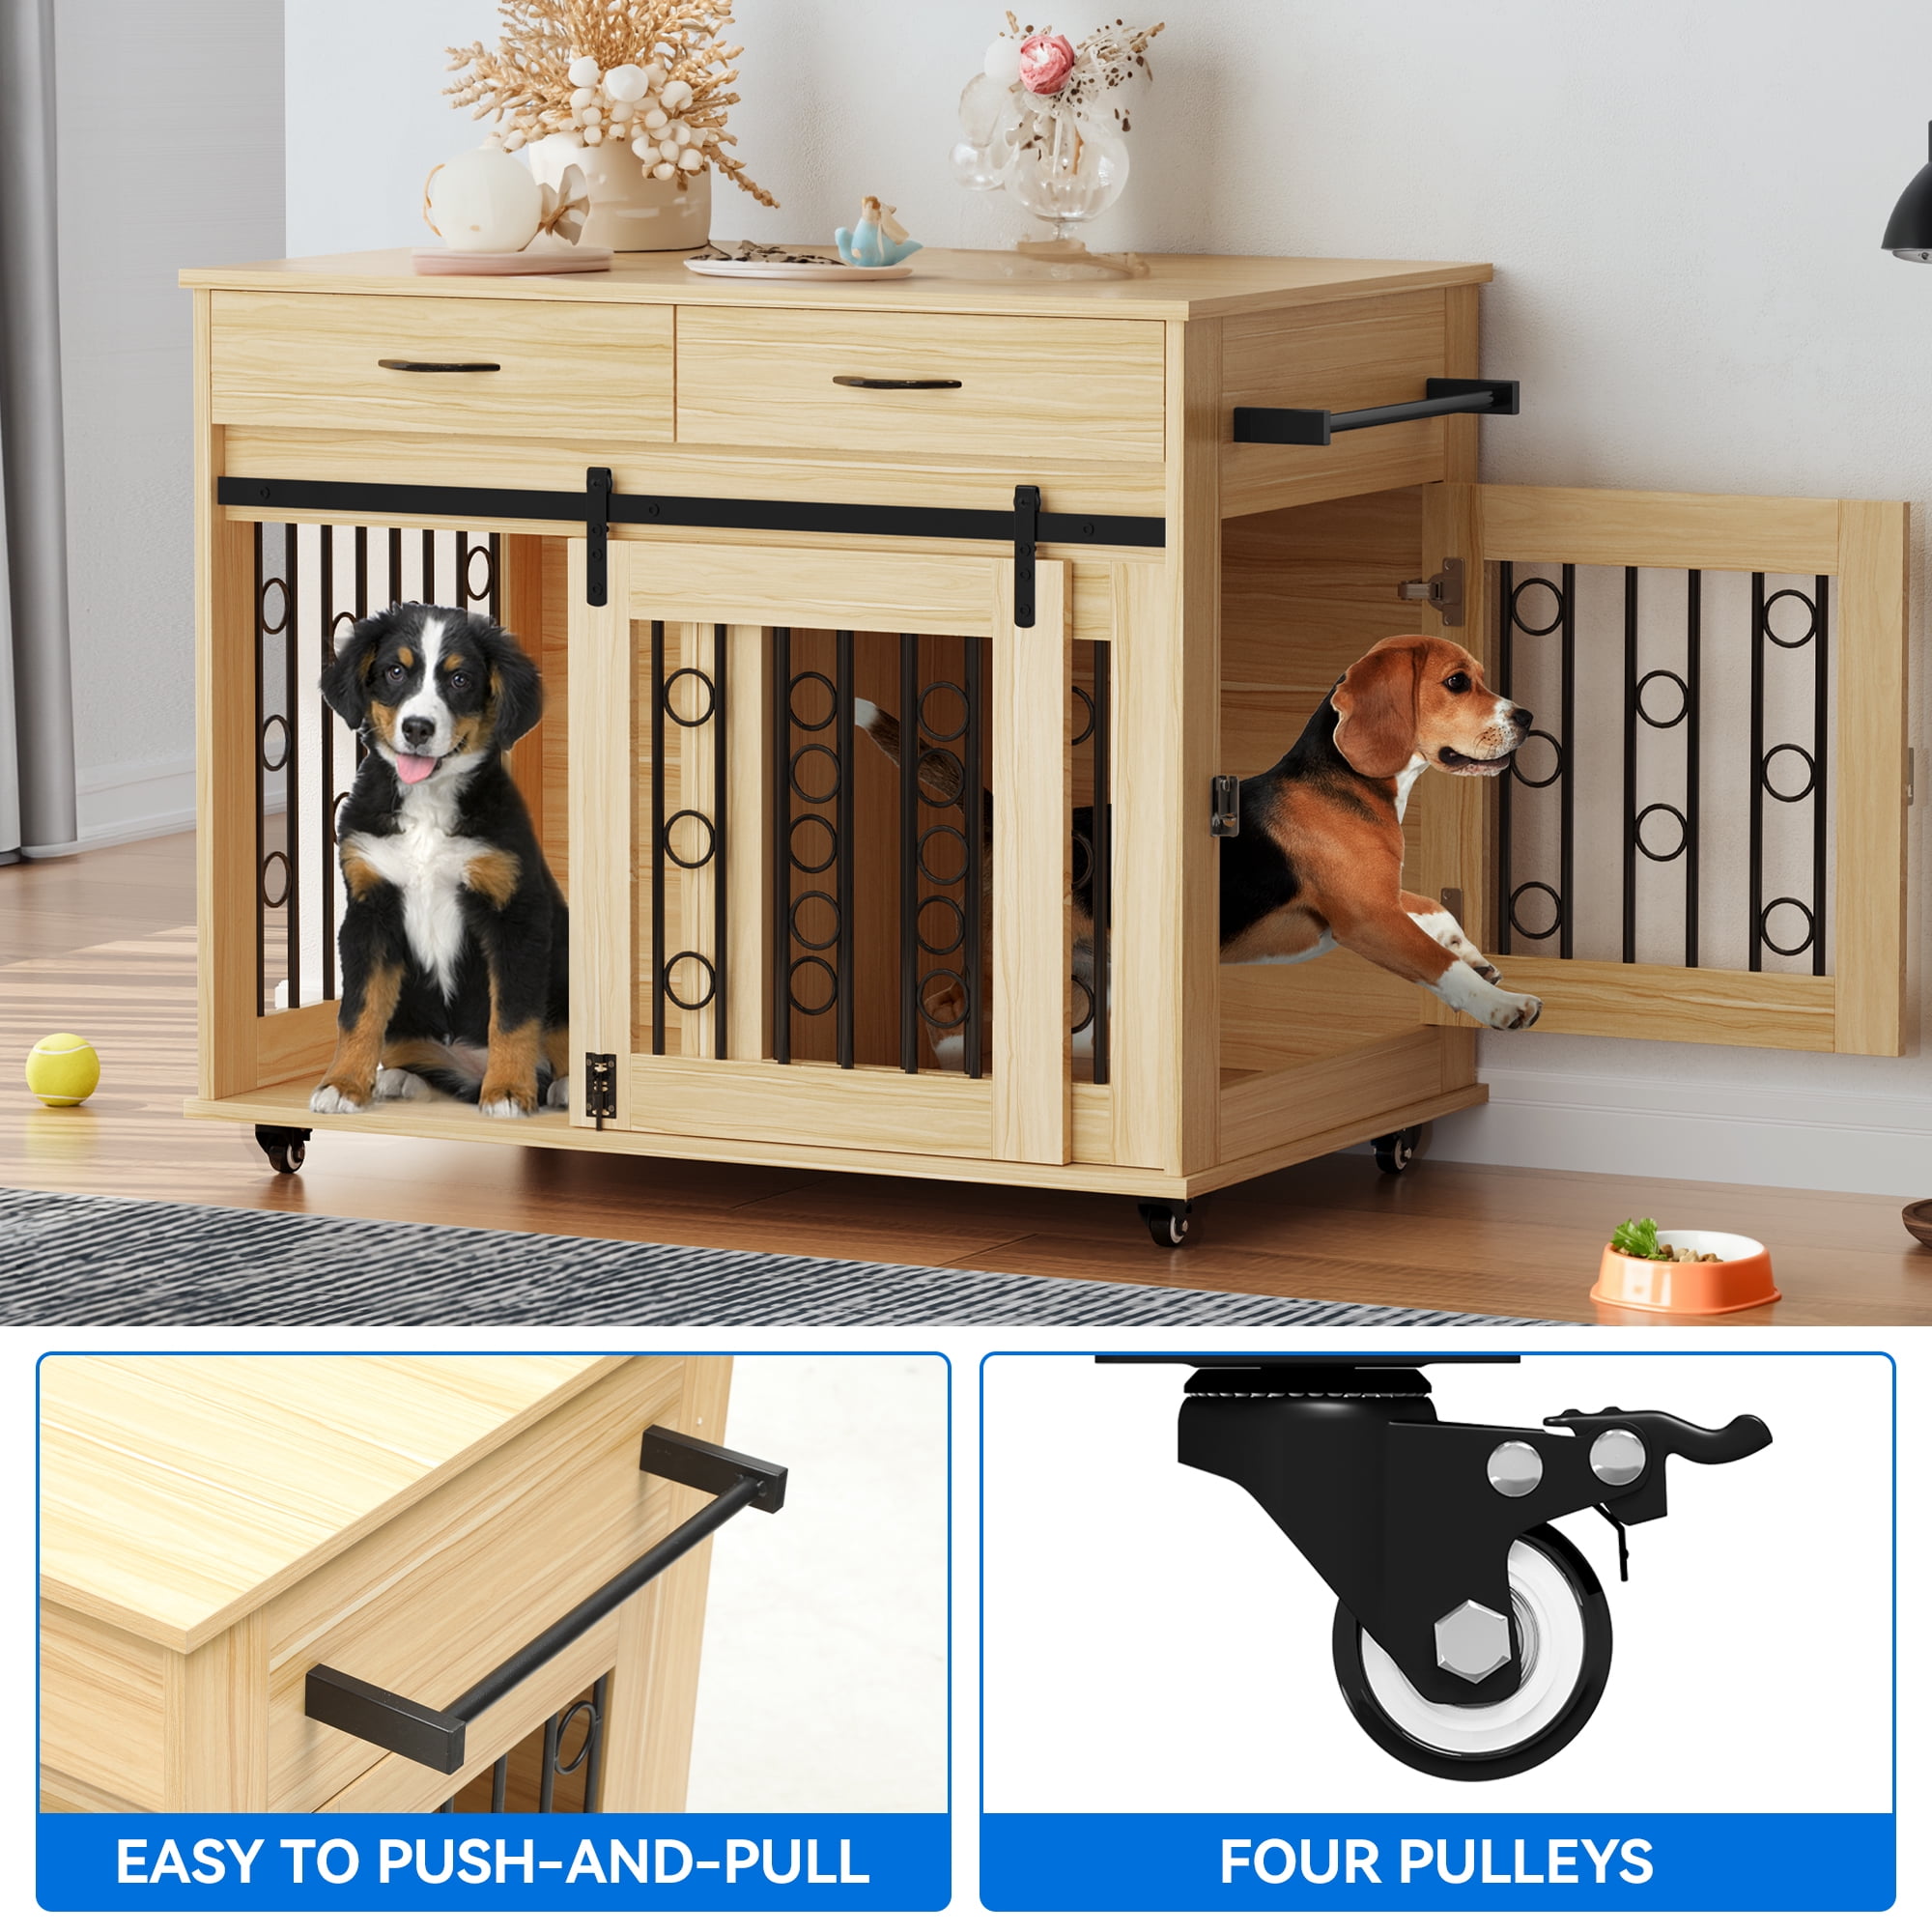 Dextrus Dog Crate Furniture Large Breed with Dog Feeder, 74.8 Inch Wooden  Dog Kennel Furniture Indoor Heavy Duty Dog Crate with Drawers, TV Cansole  Table2 Room Divider for 2 Medium Large Dogs 